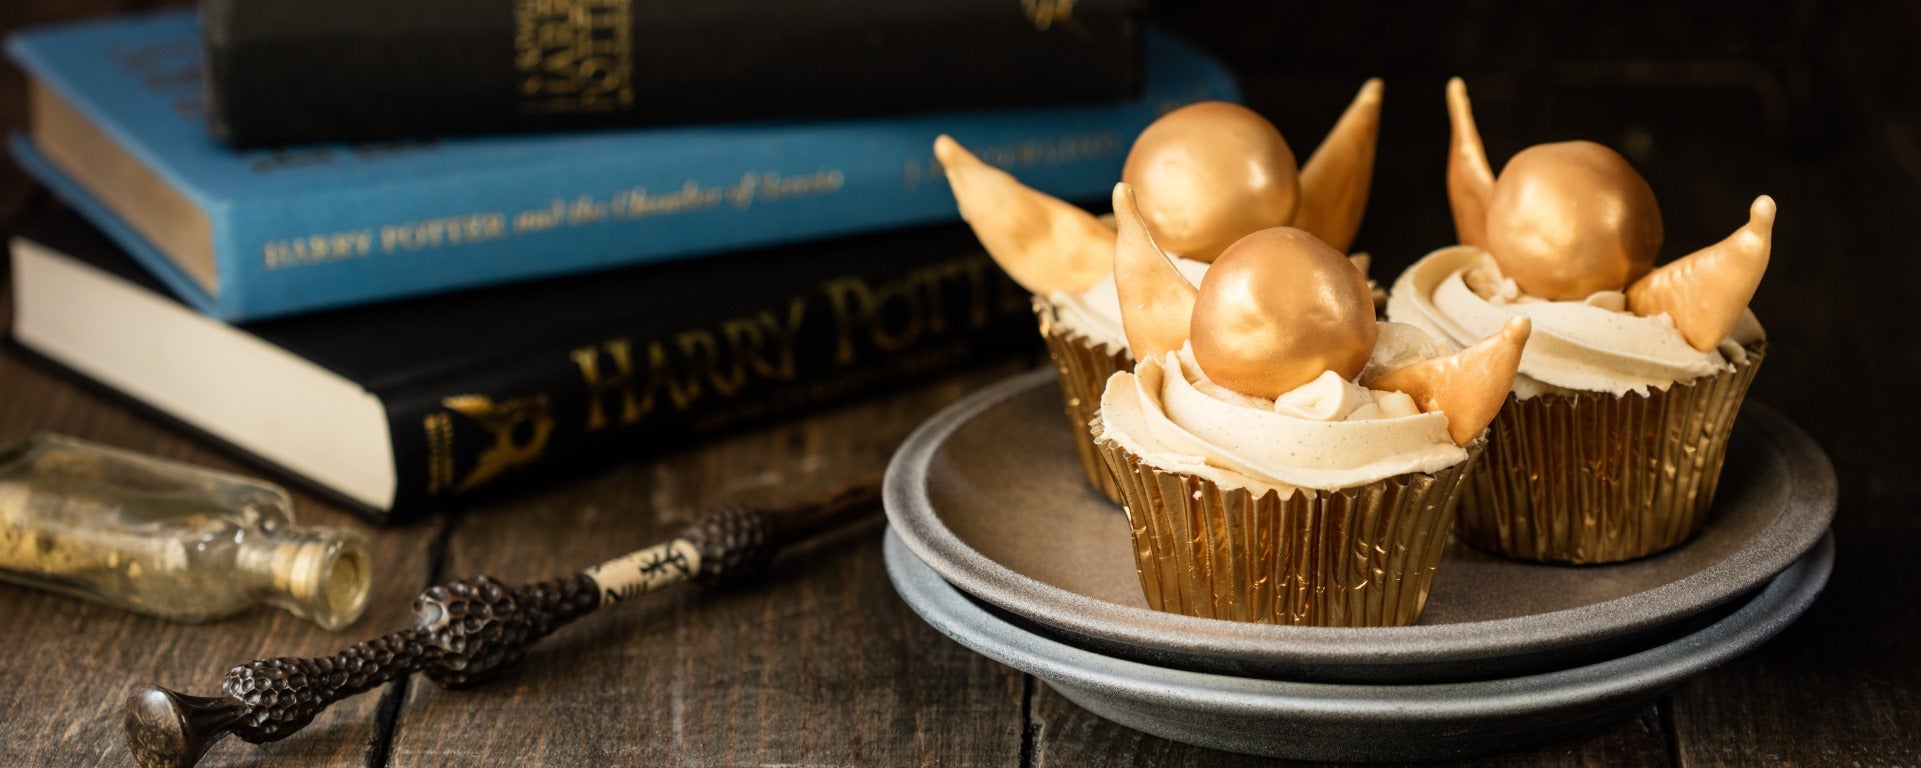 How-To-Golden-Snitch-Cupcakes_HEADER.jpg